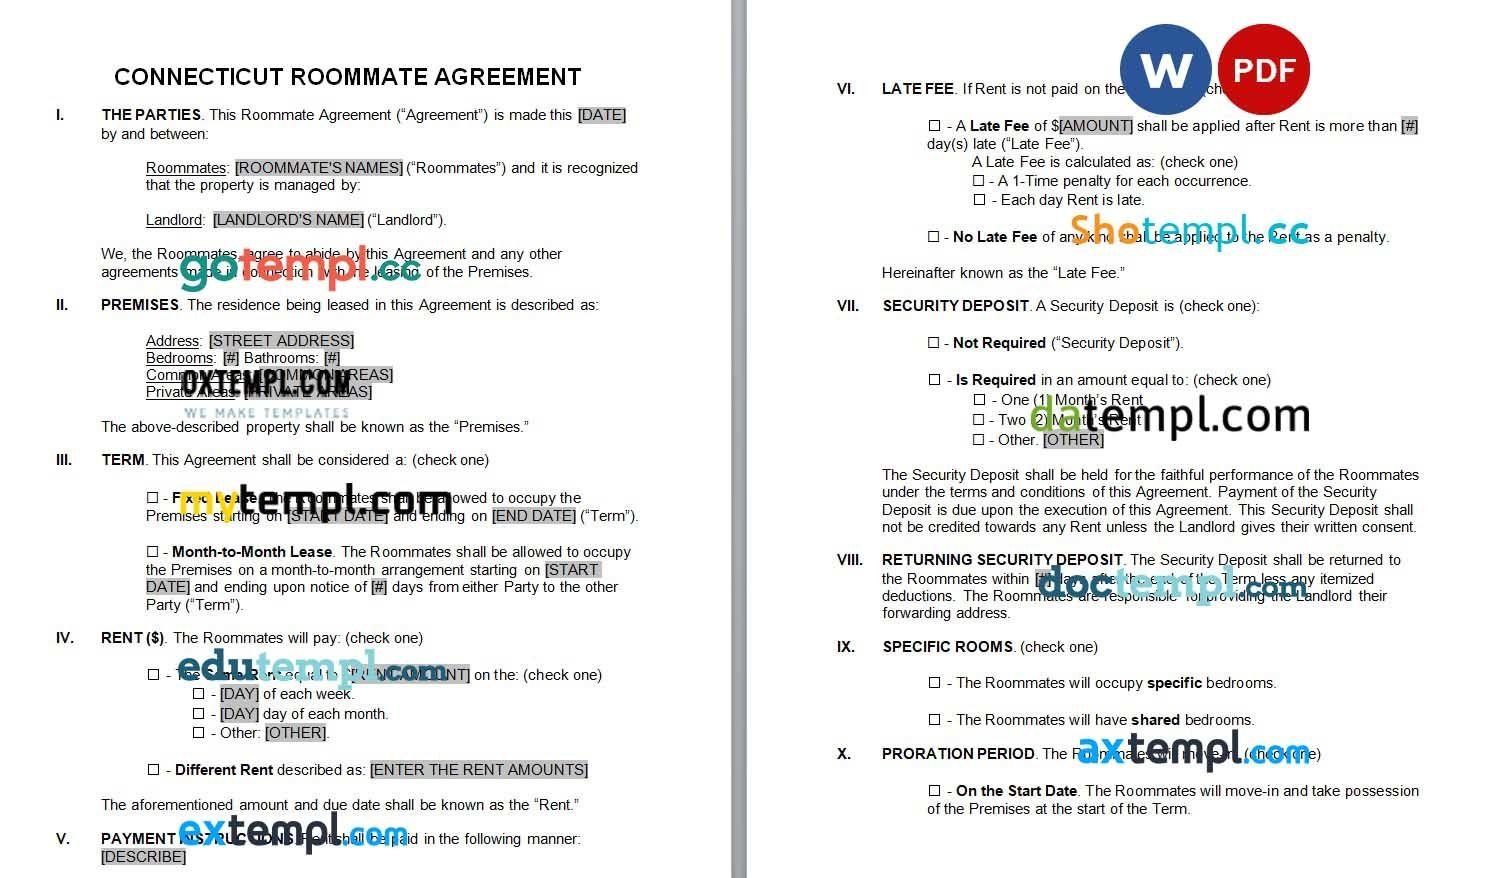 Connecticut Roommate Agreement Word example, fully editable